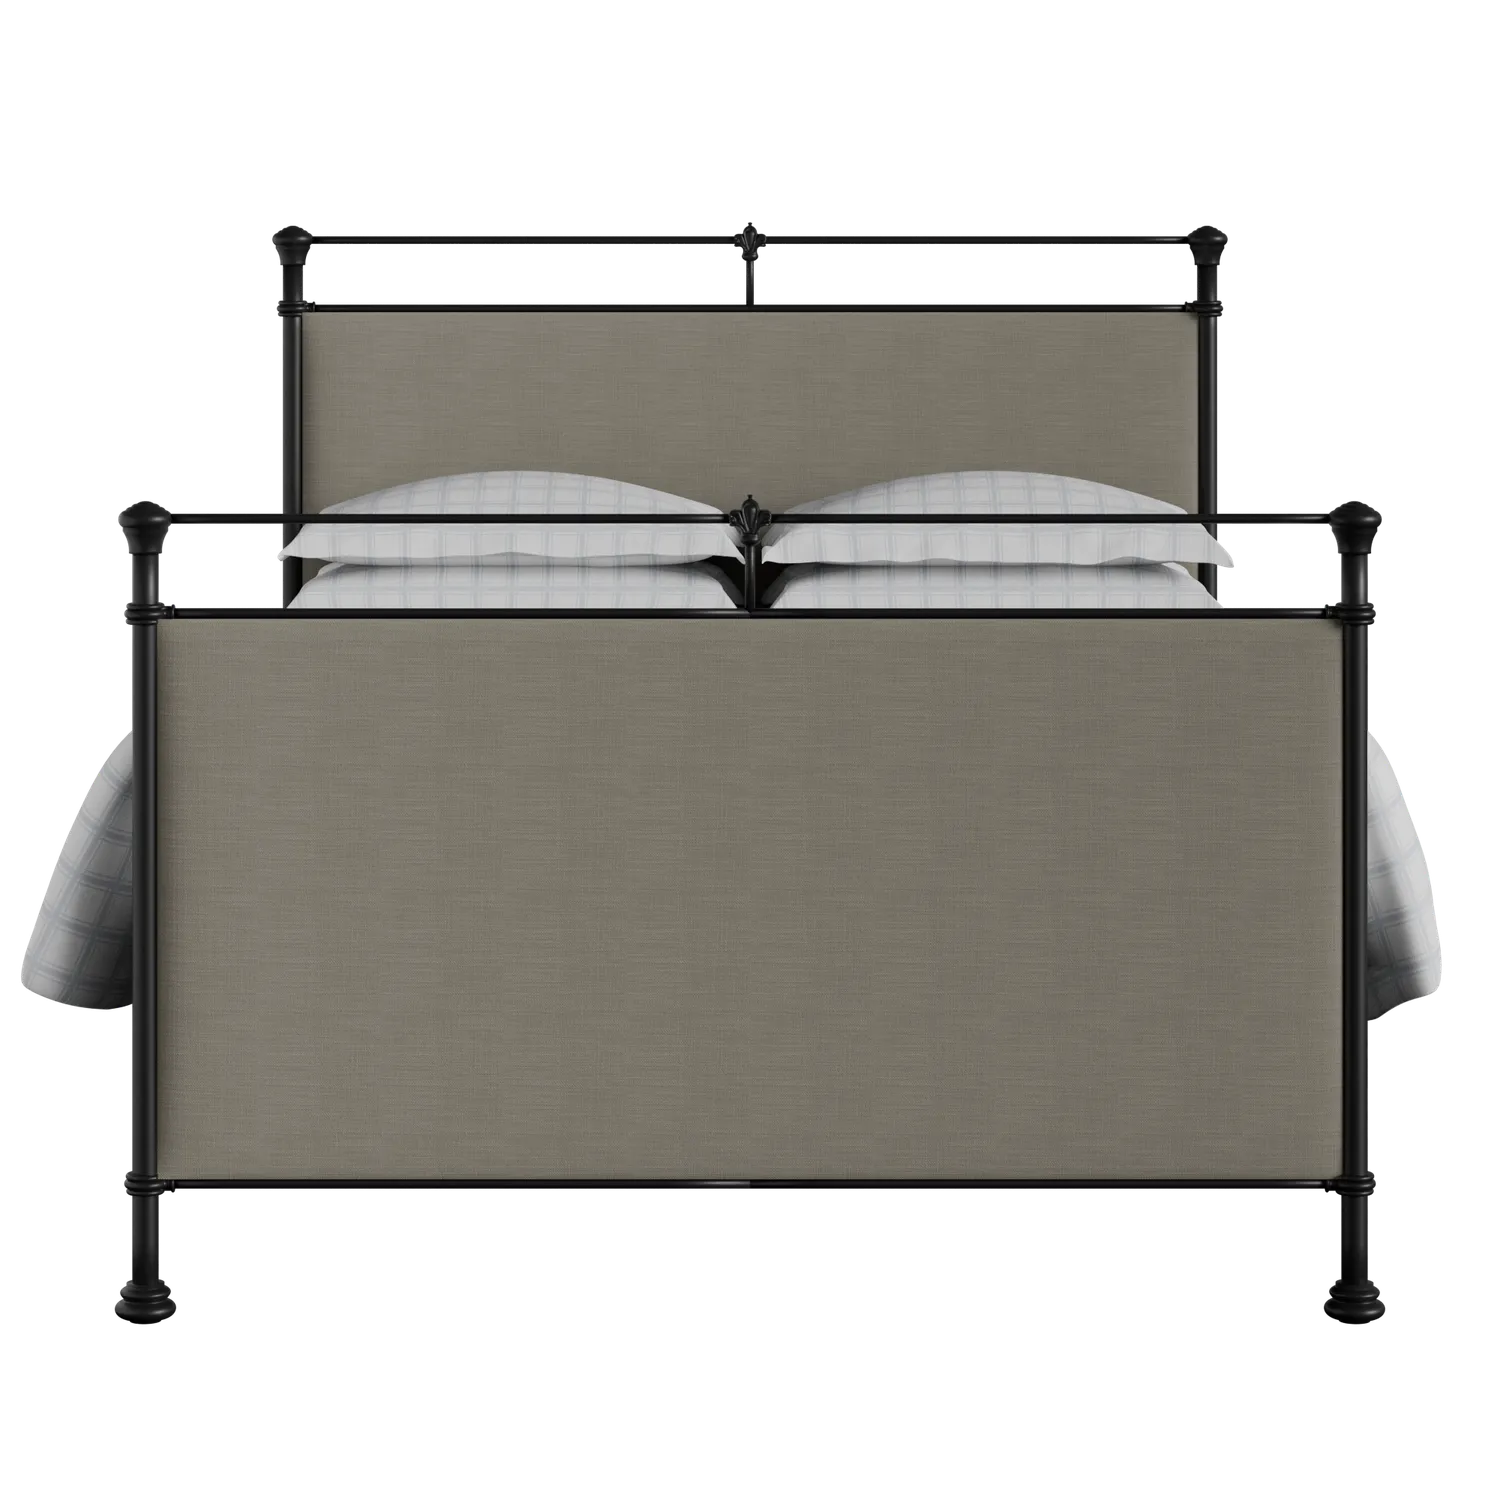 Lille iron/metal upholstered bed in black with grey fabric